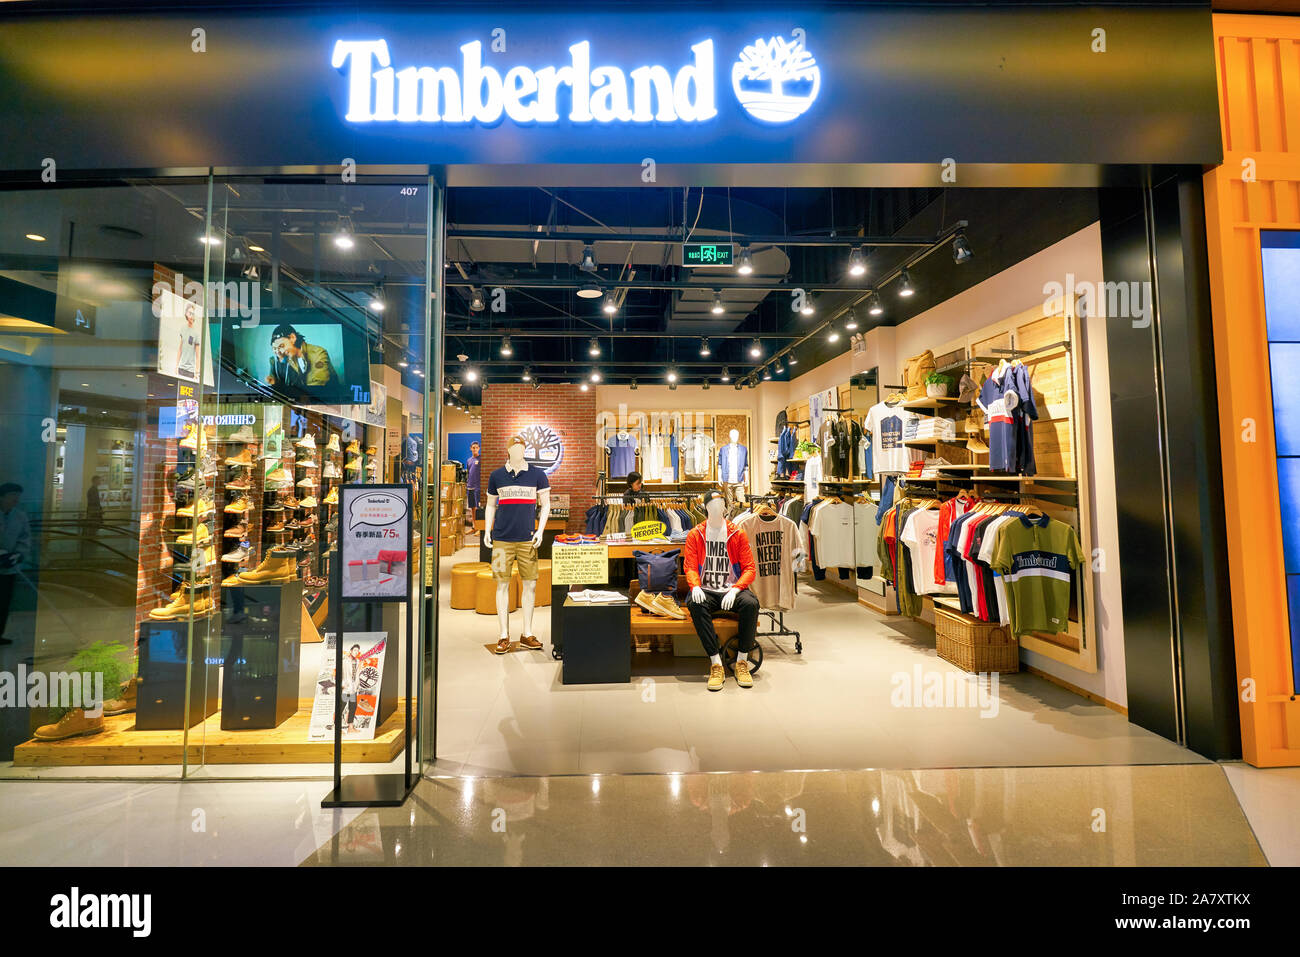 Page 3 - Timberland Boots High Resolution Stock Photography and Images -  Alamy